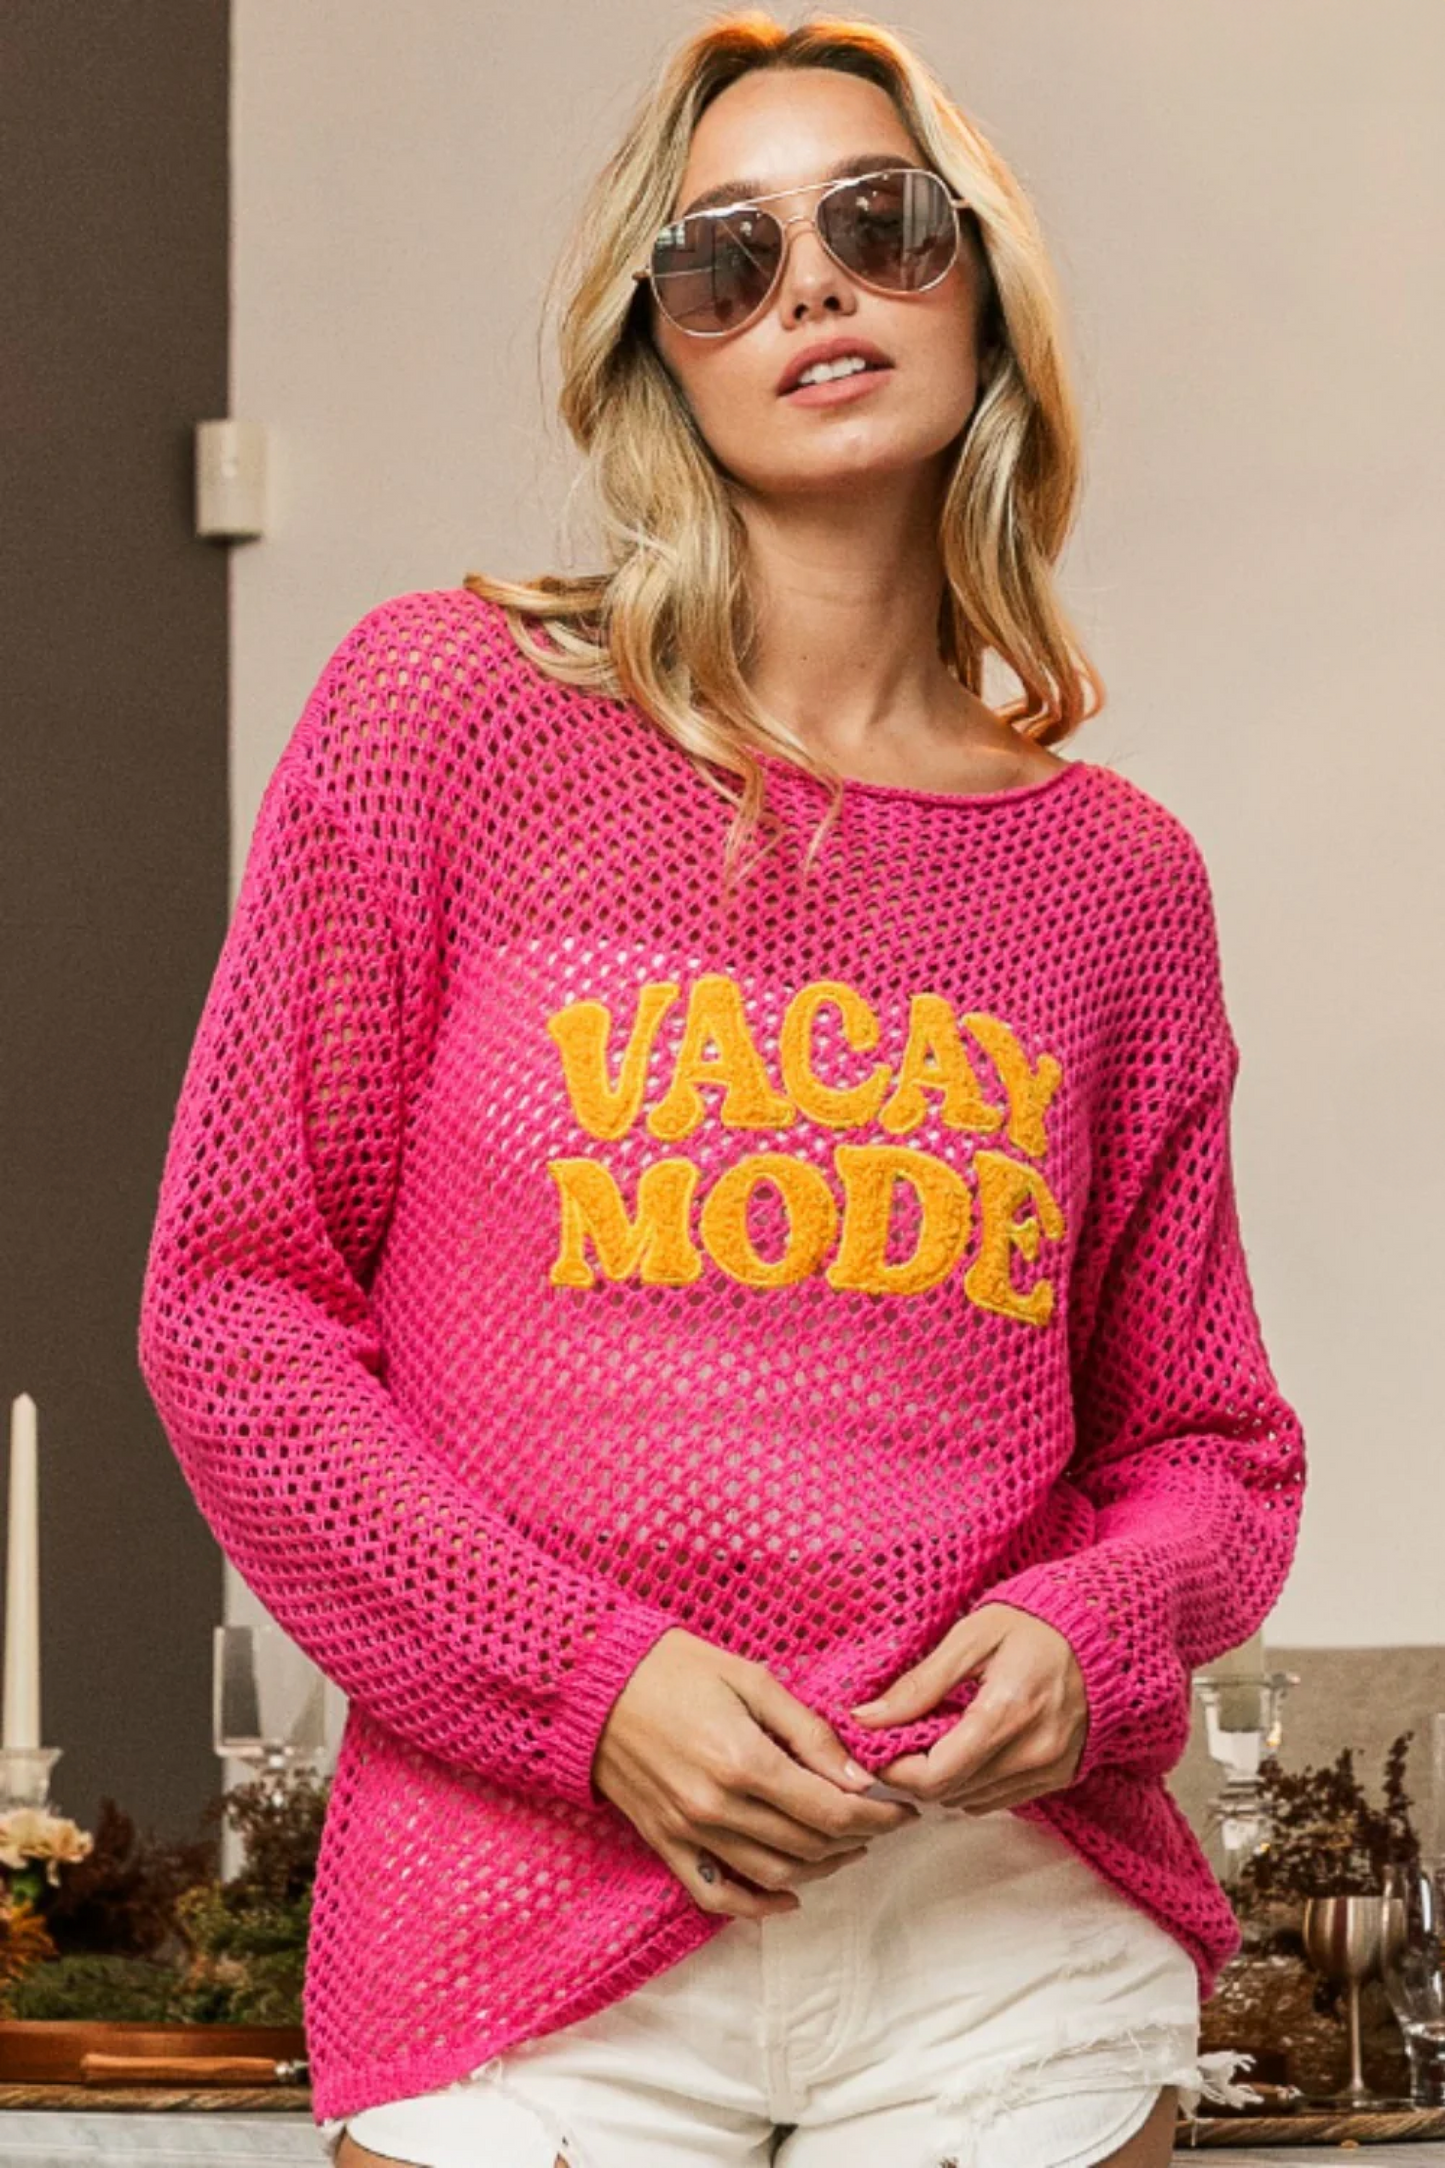 VACAY MODE Embroidered Knit Cover Up